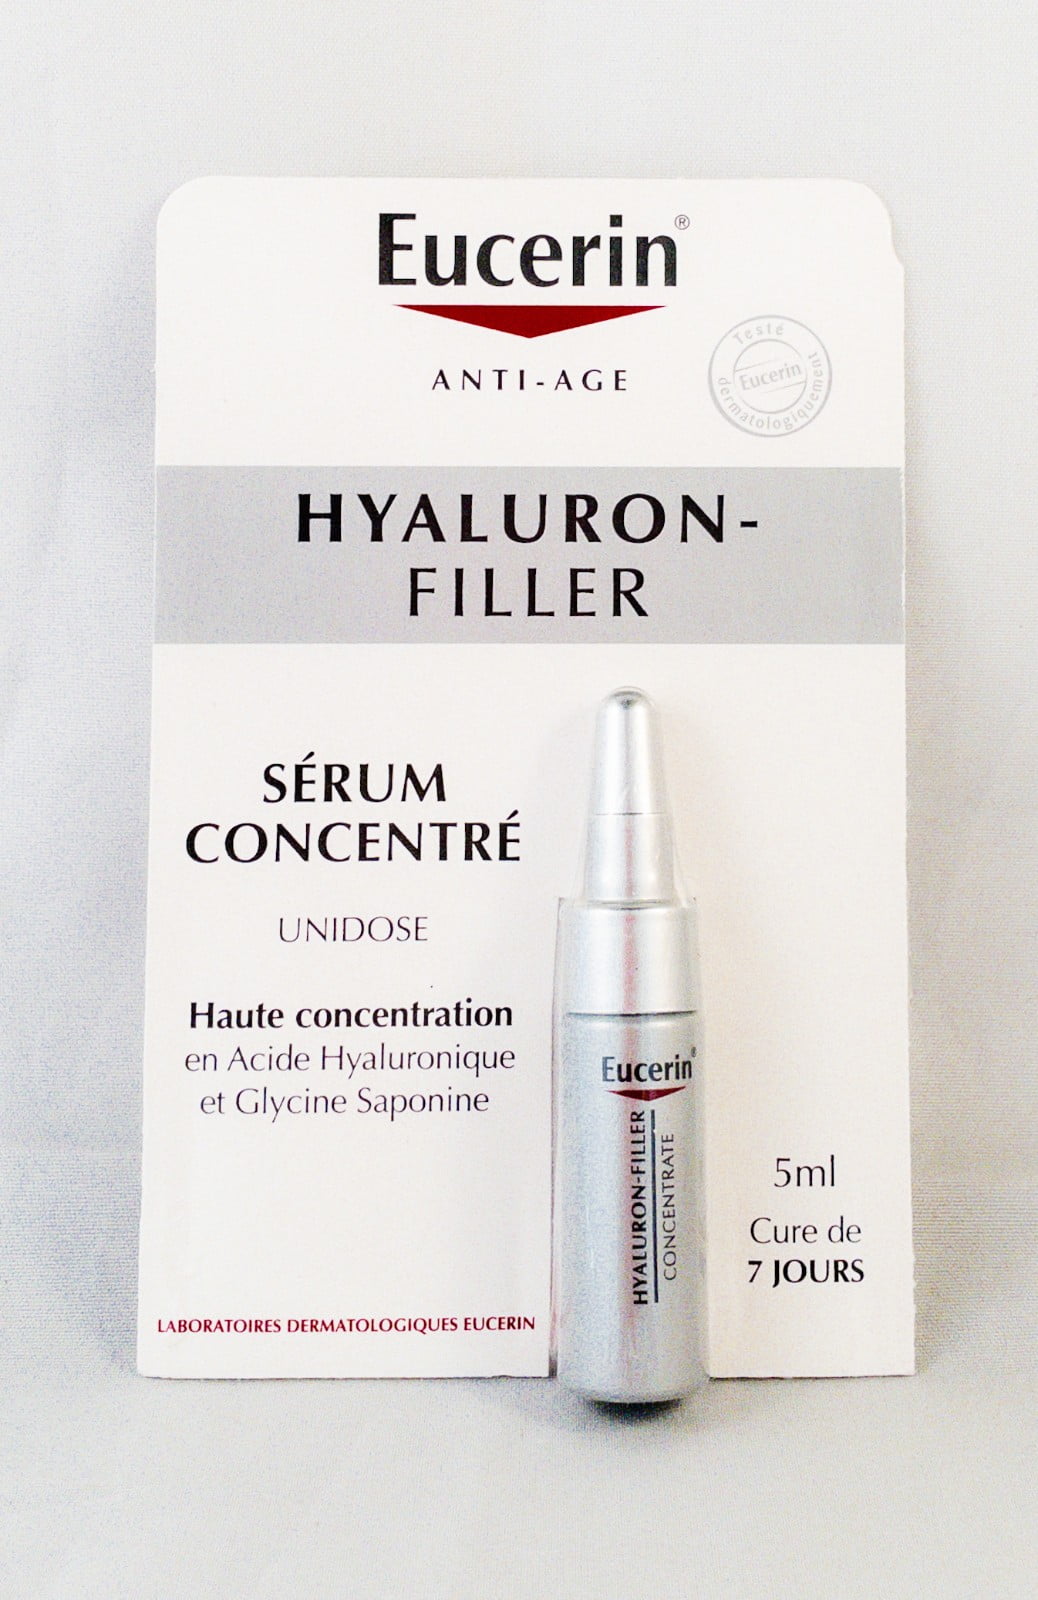 Eucerin Hyaluron-Filler Serum Anti-Aging With High Concentration of Hyaluronic Acid - Walmart.com